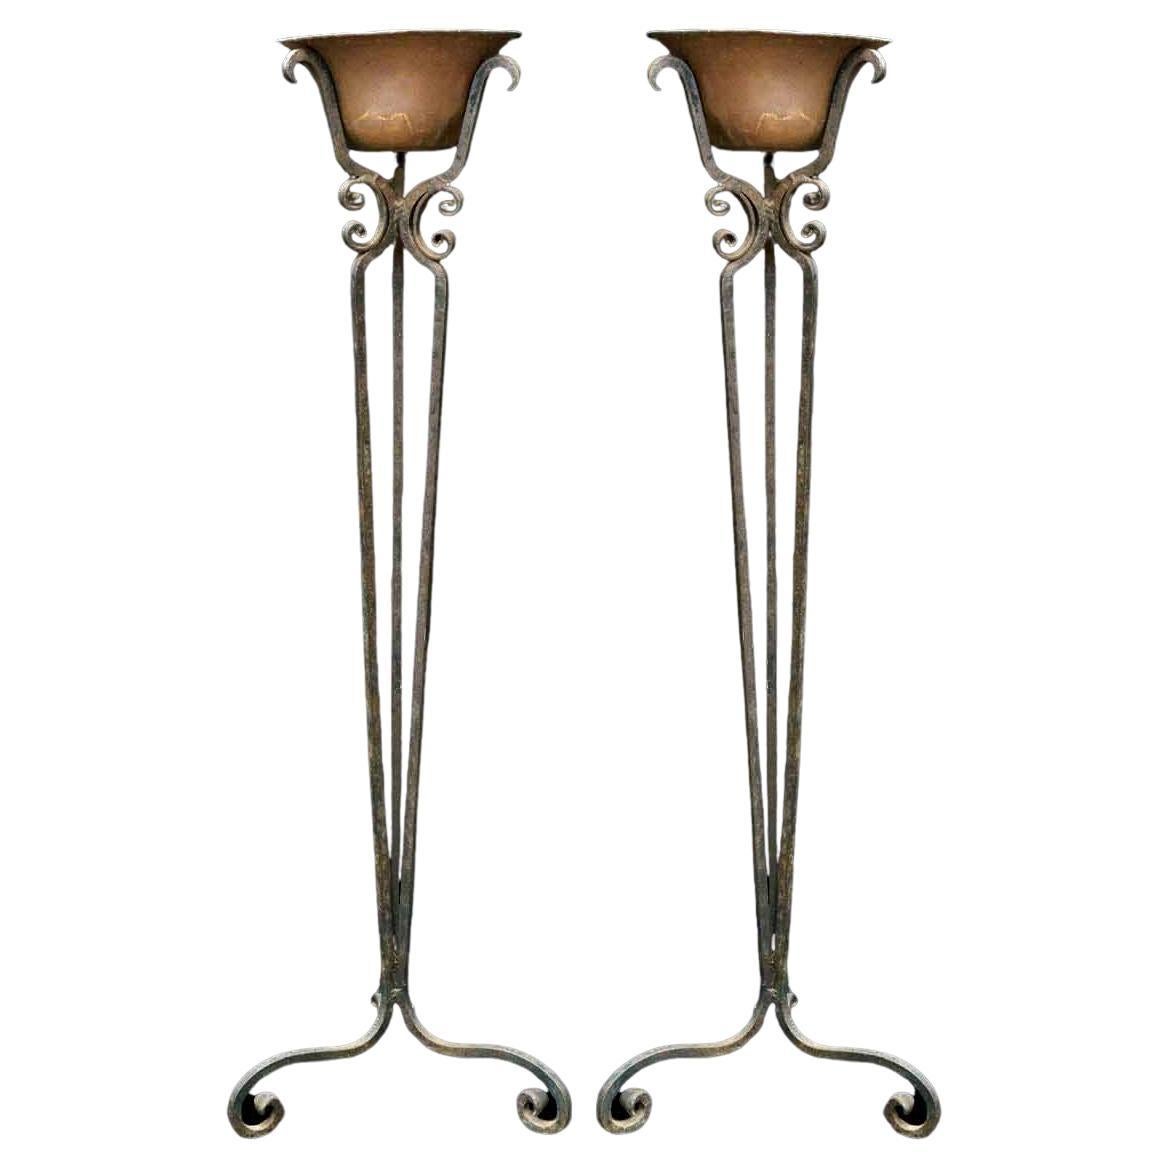 Torchiere Plant Stands Copper Inserts on Wrought Iron